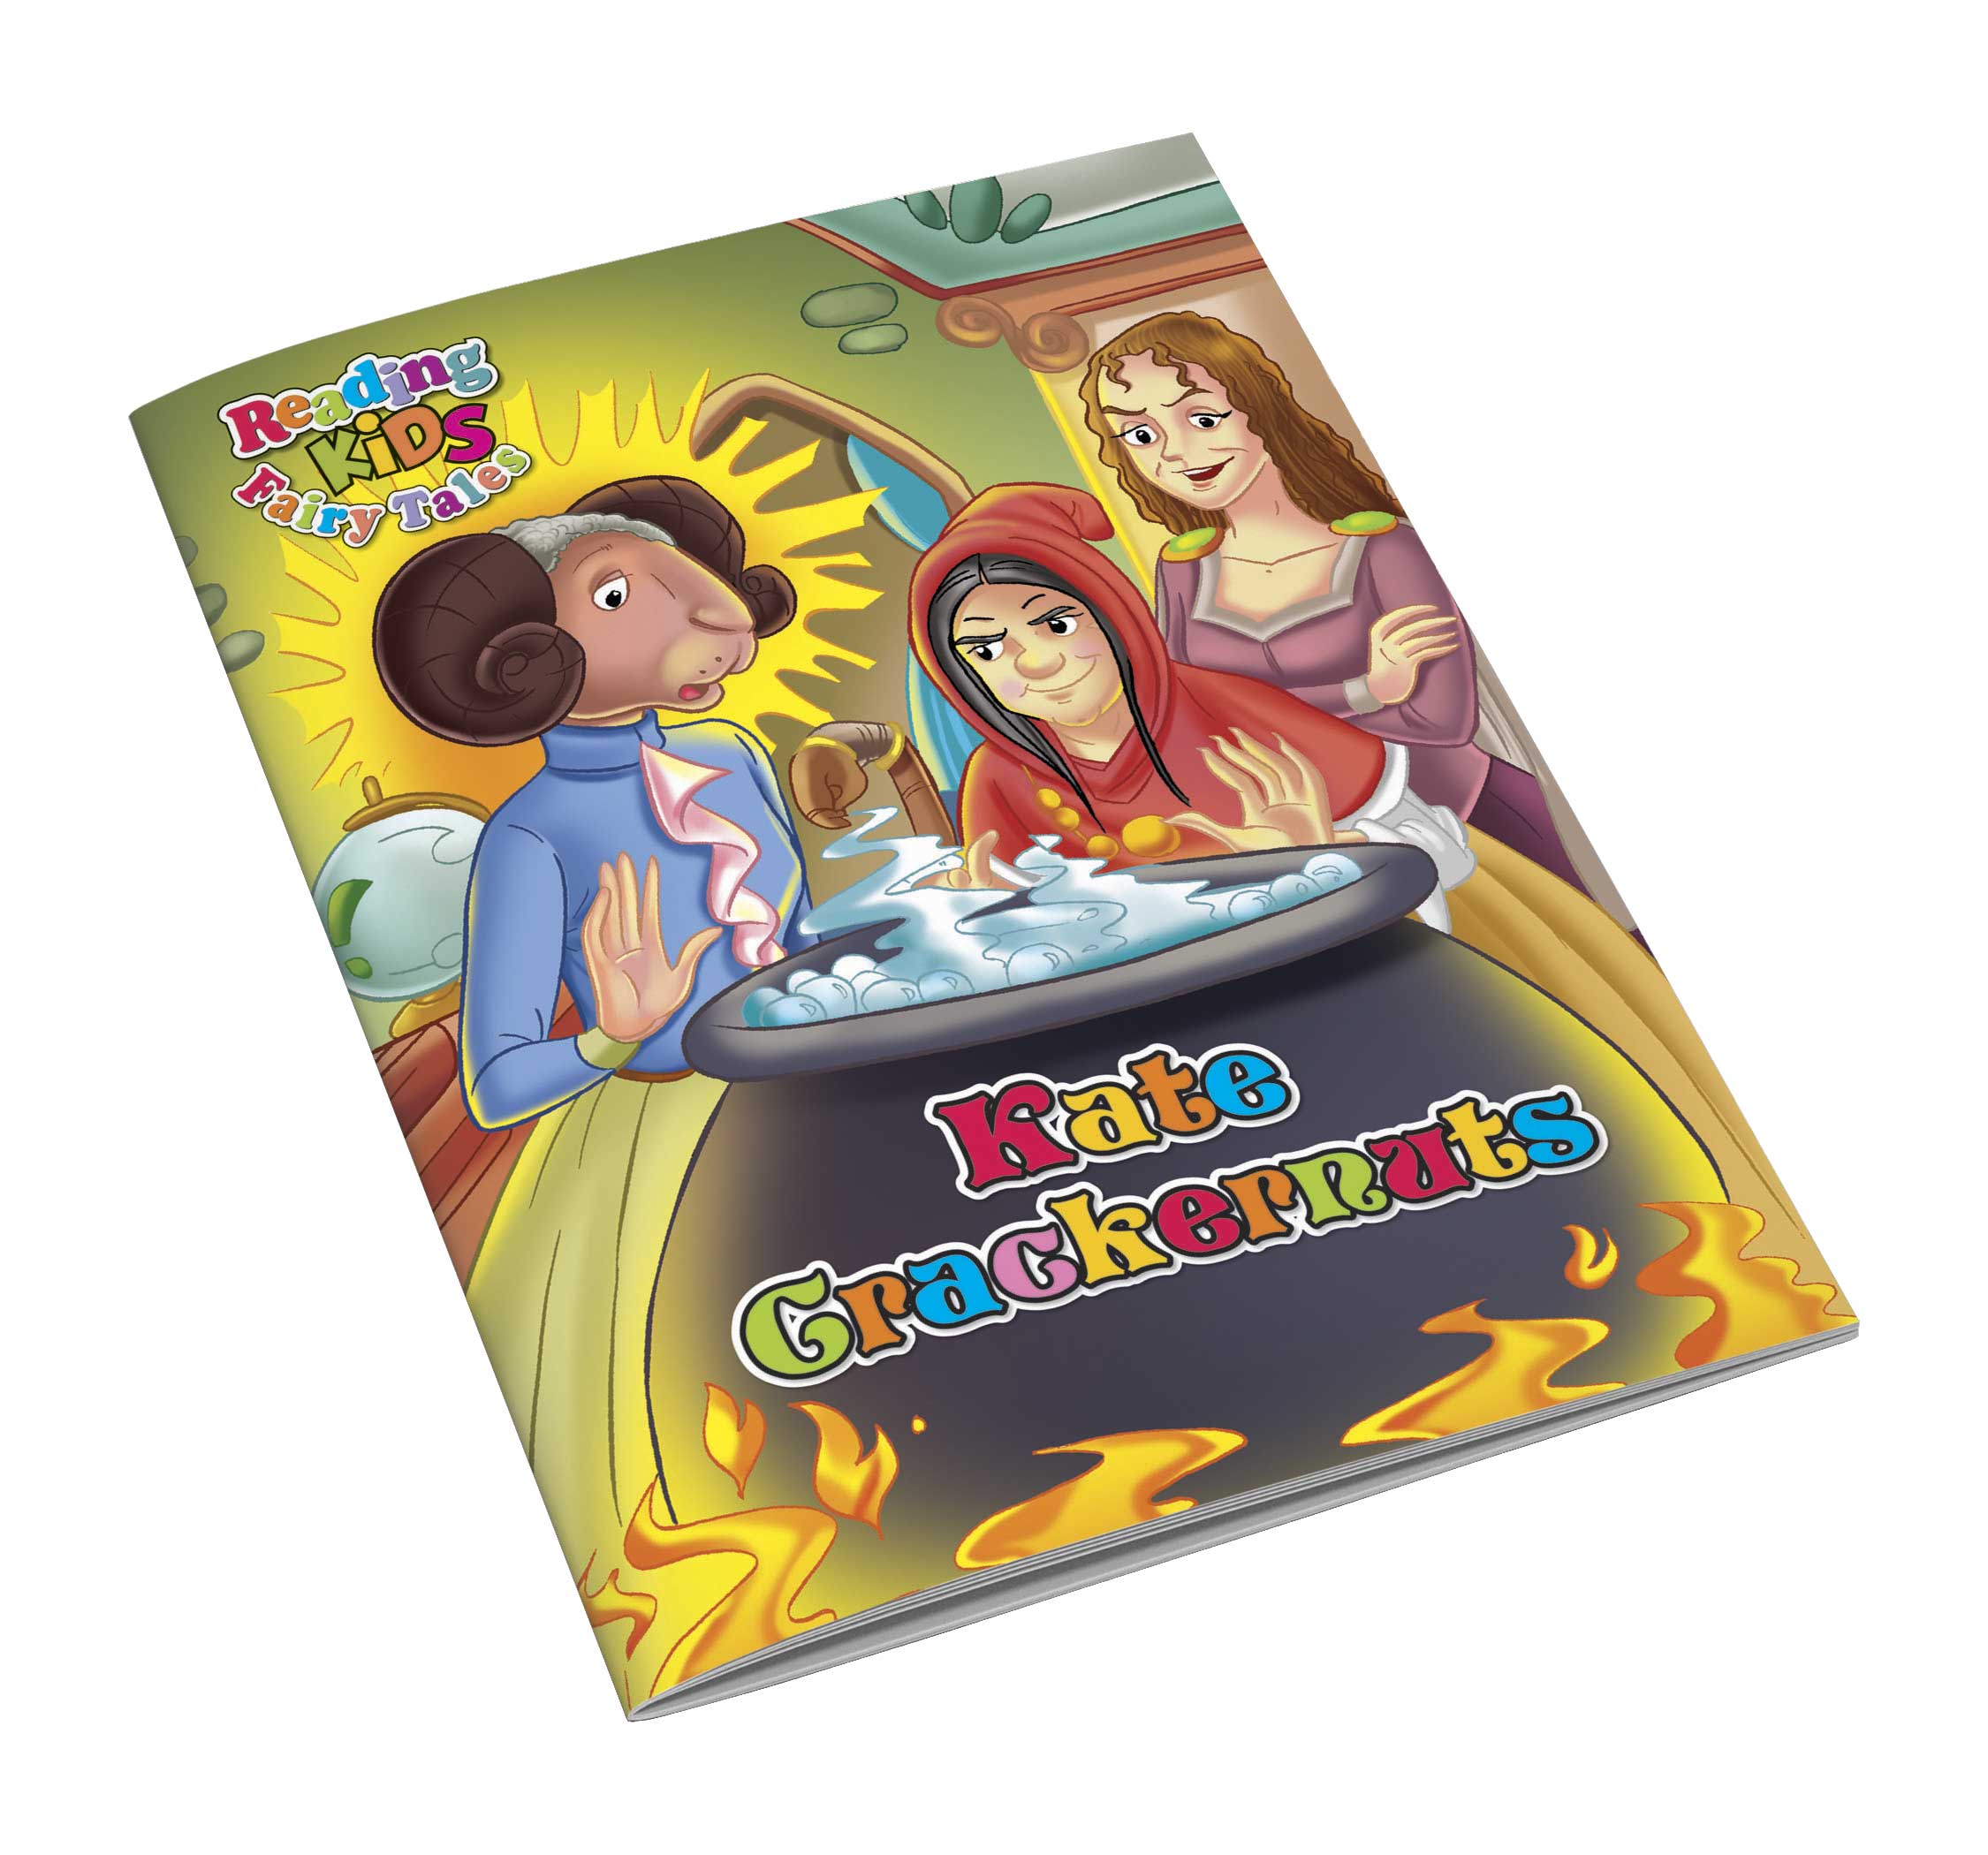 Kate Crackernats Story Book - English Fairy Tale For Kids